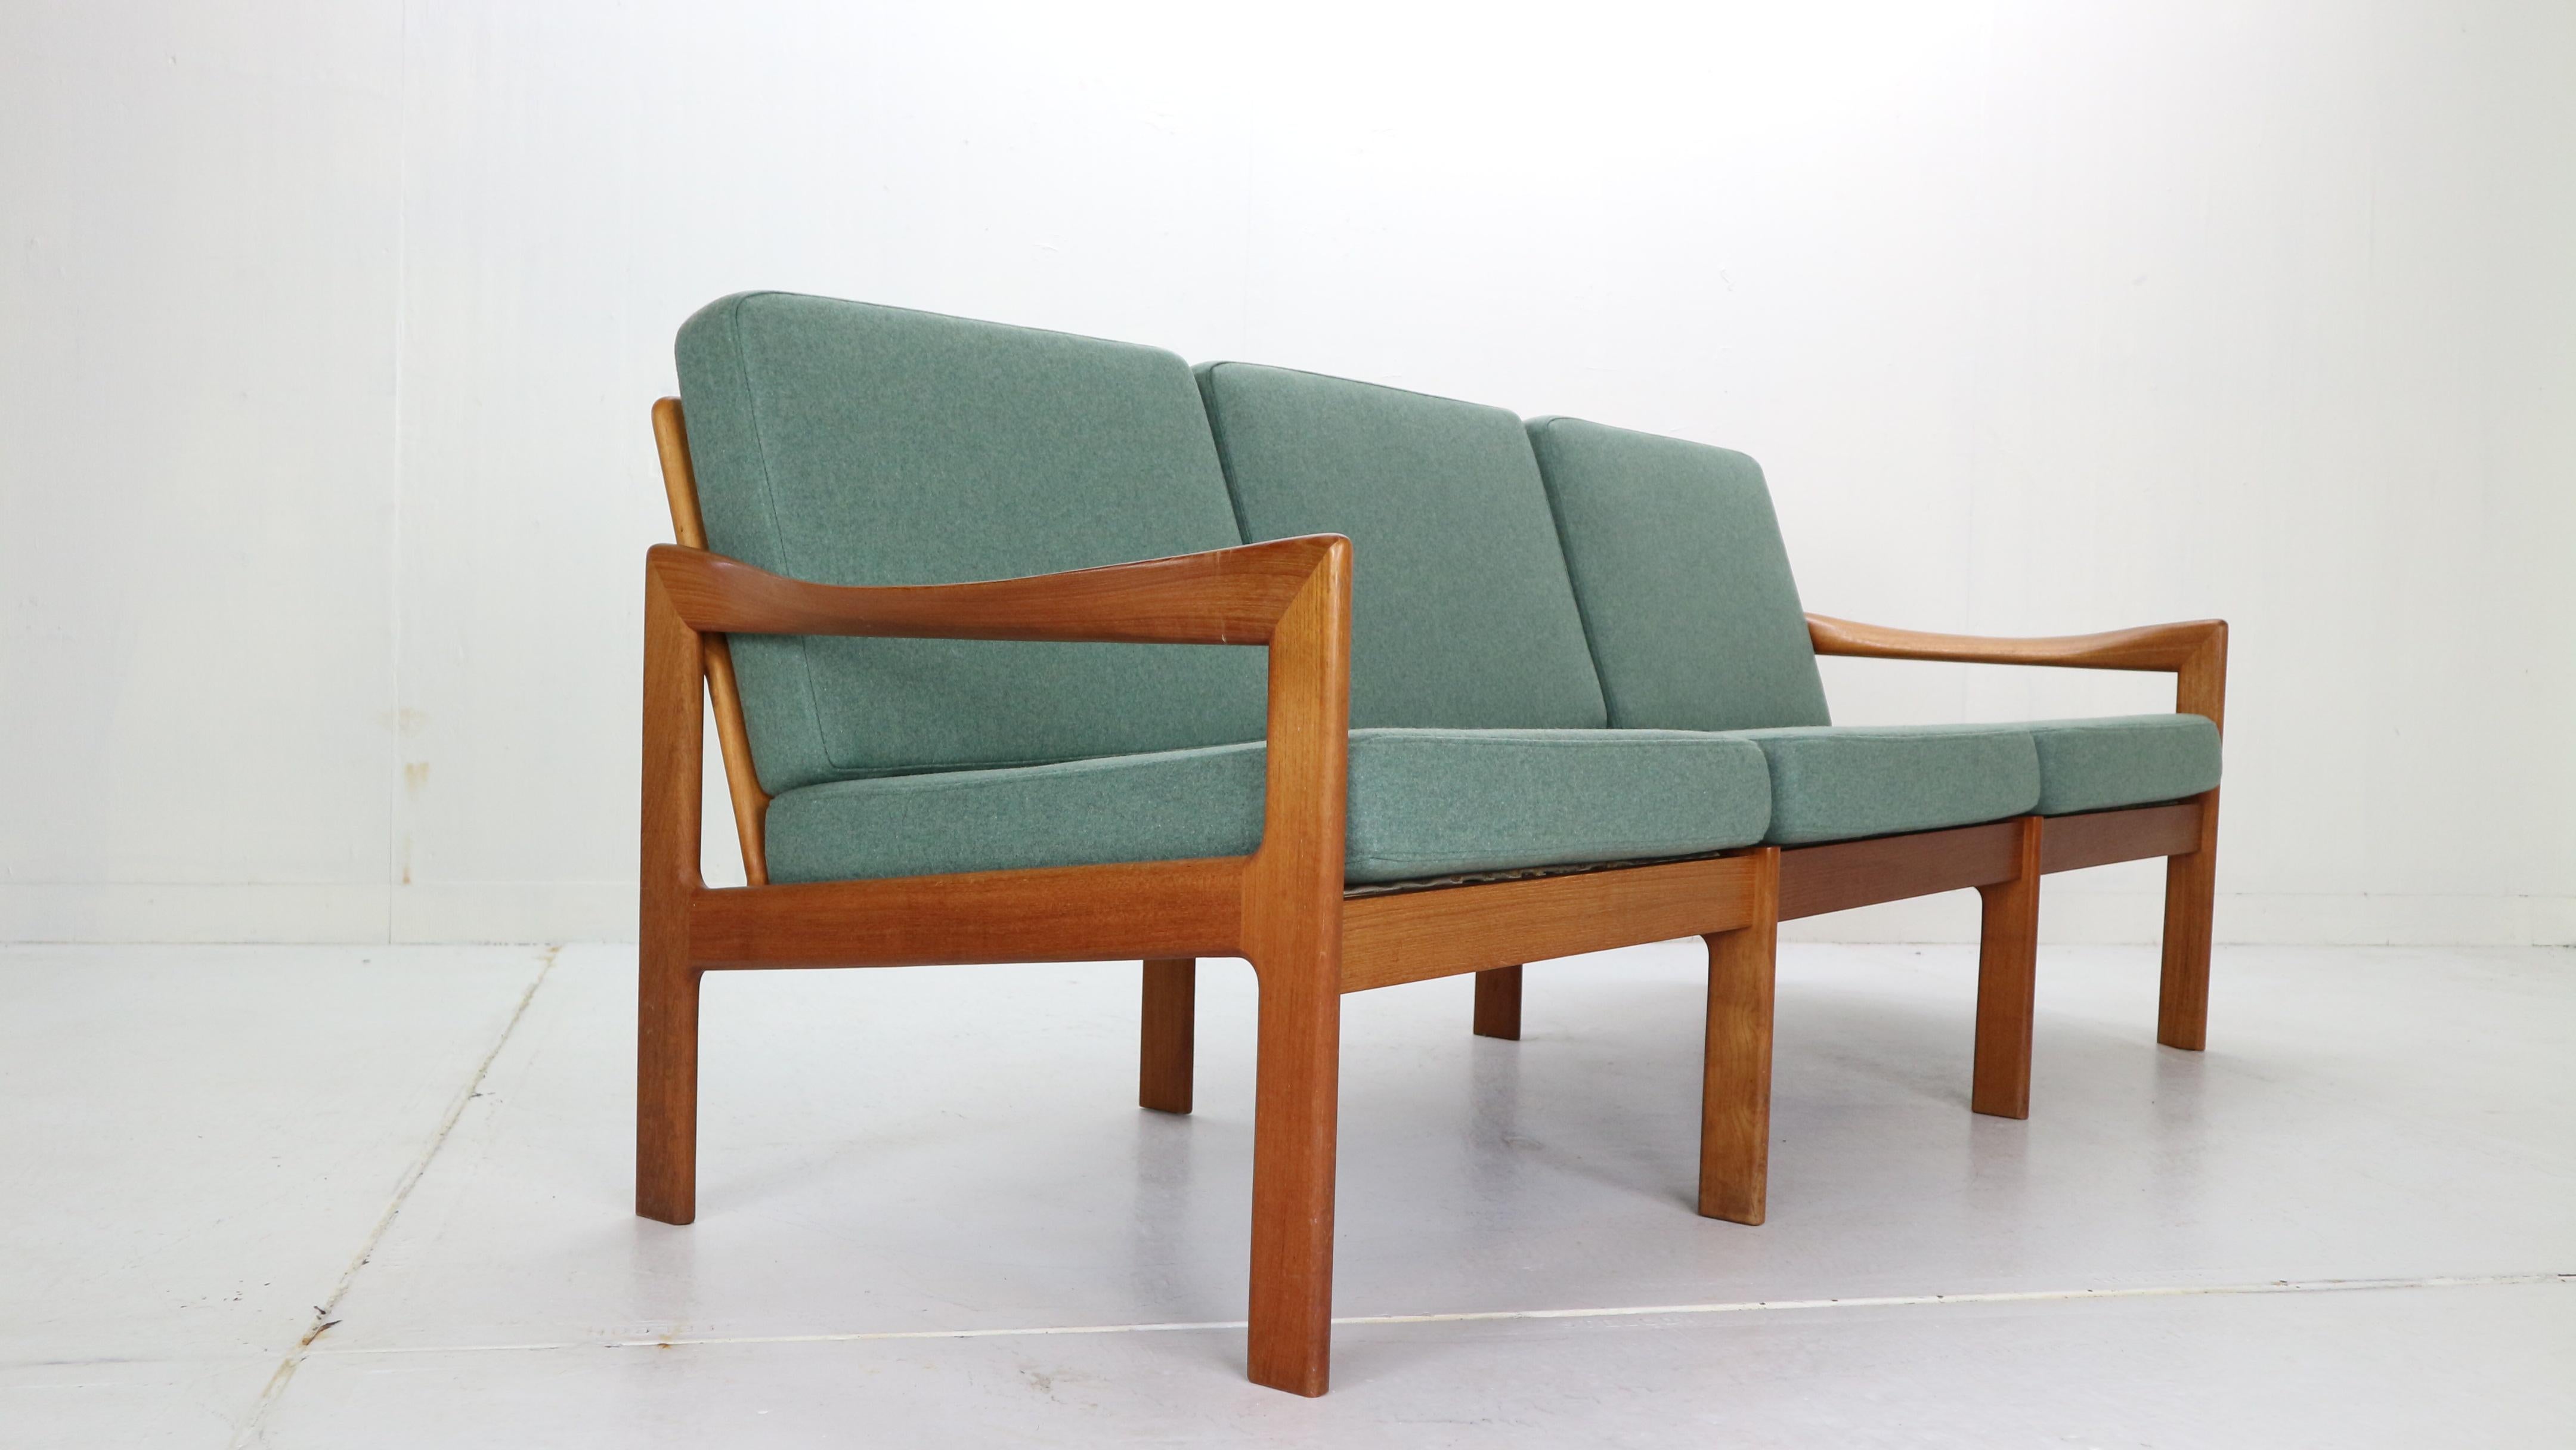 Scandinavian Modern period three-seat sofa designed by Illum Wikkelsø for Niels Eilersen, 1960, Denmark.
Curved teak wooden frame with beautiful details and backrest.
Seating has been newly upholstered with green wool furniture fabric.


       